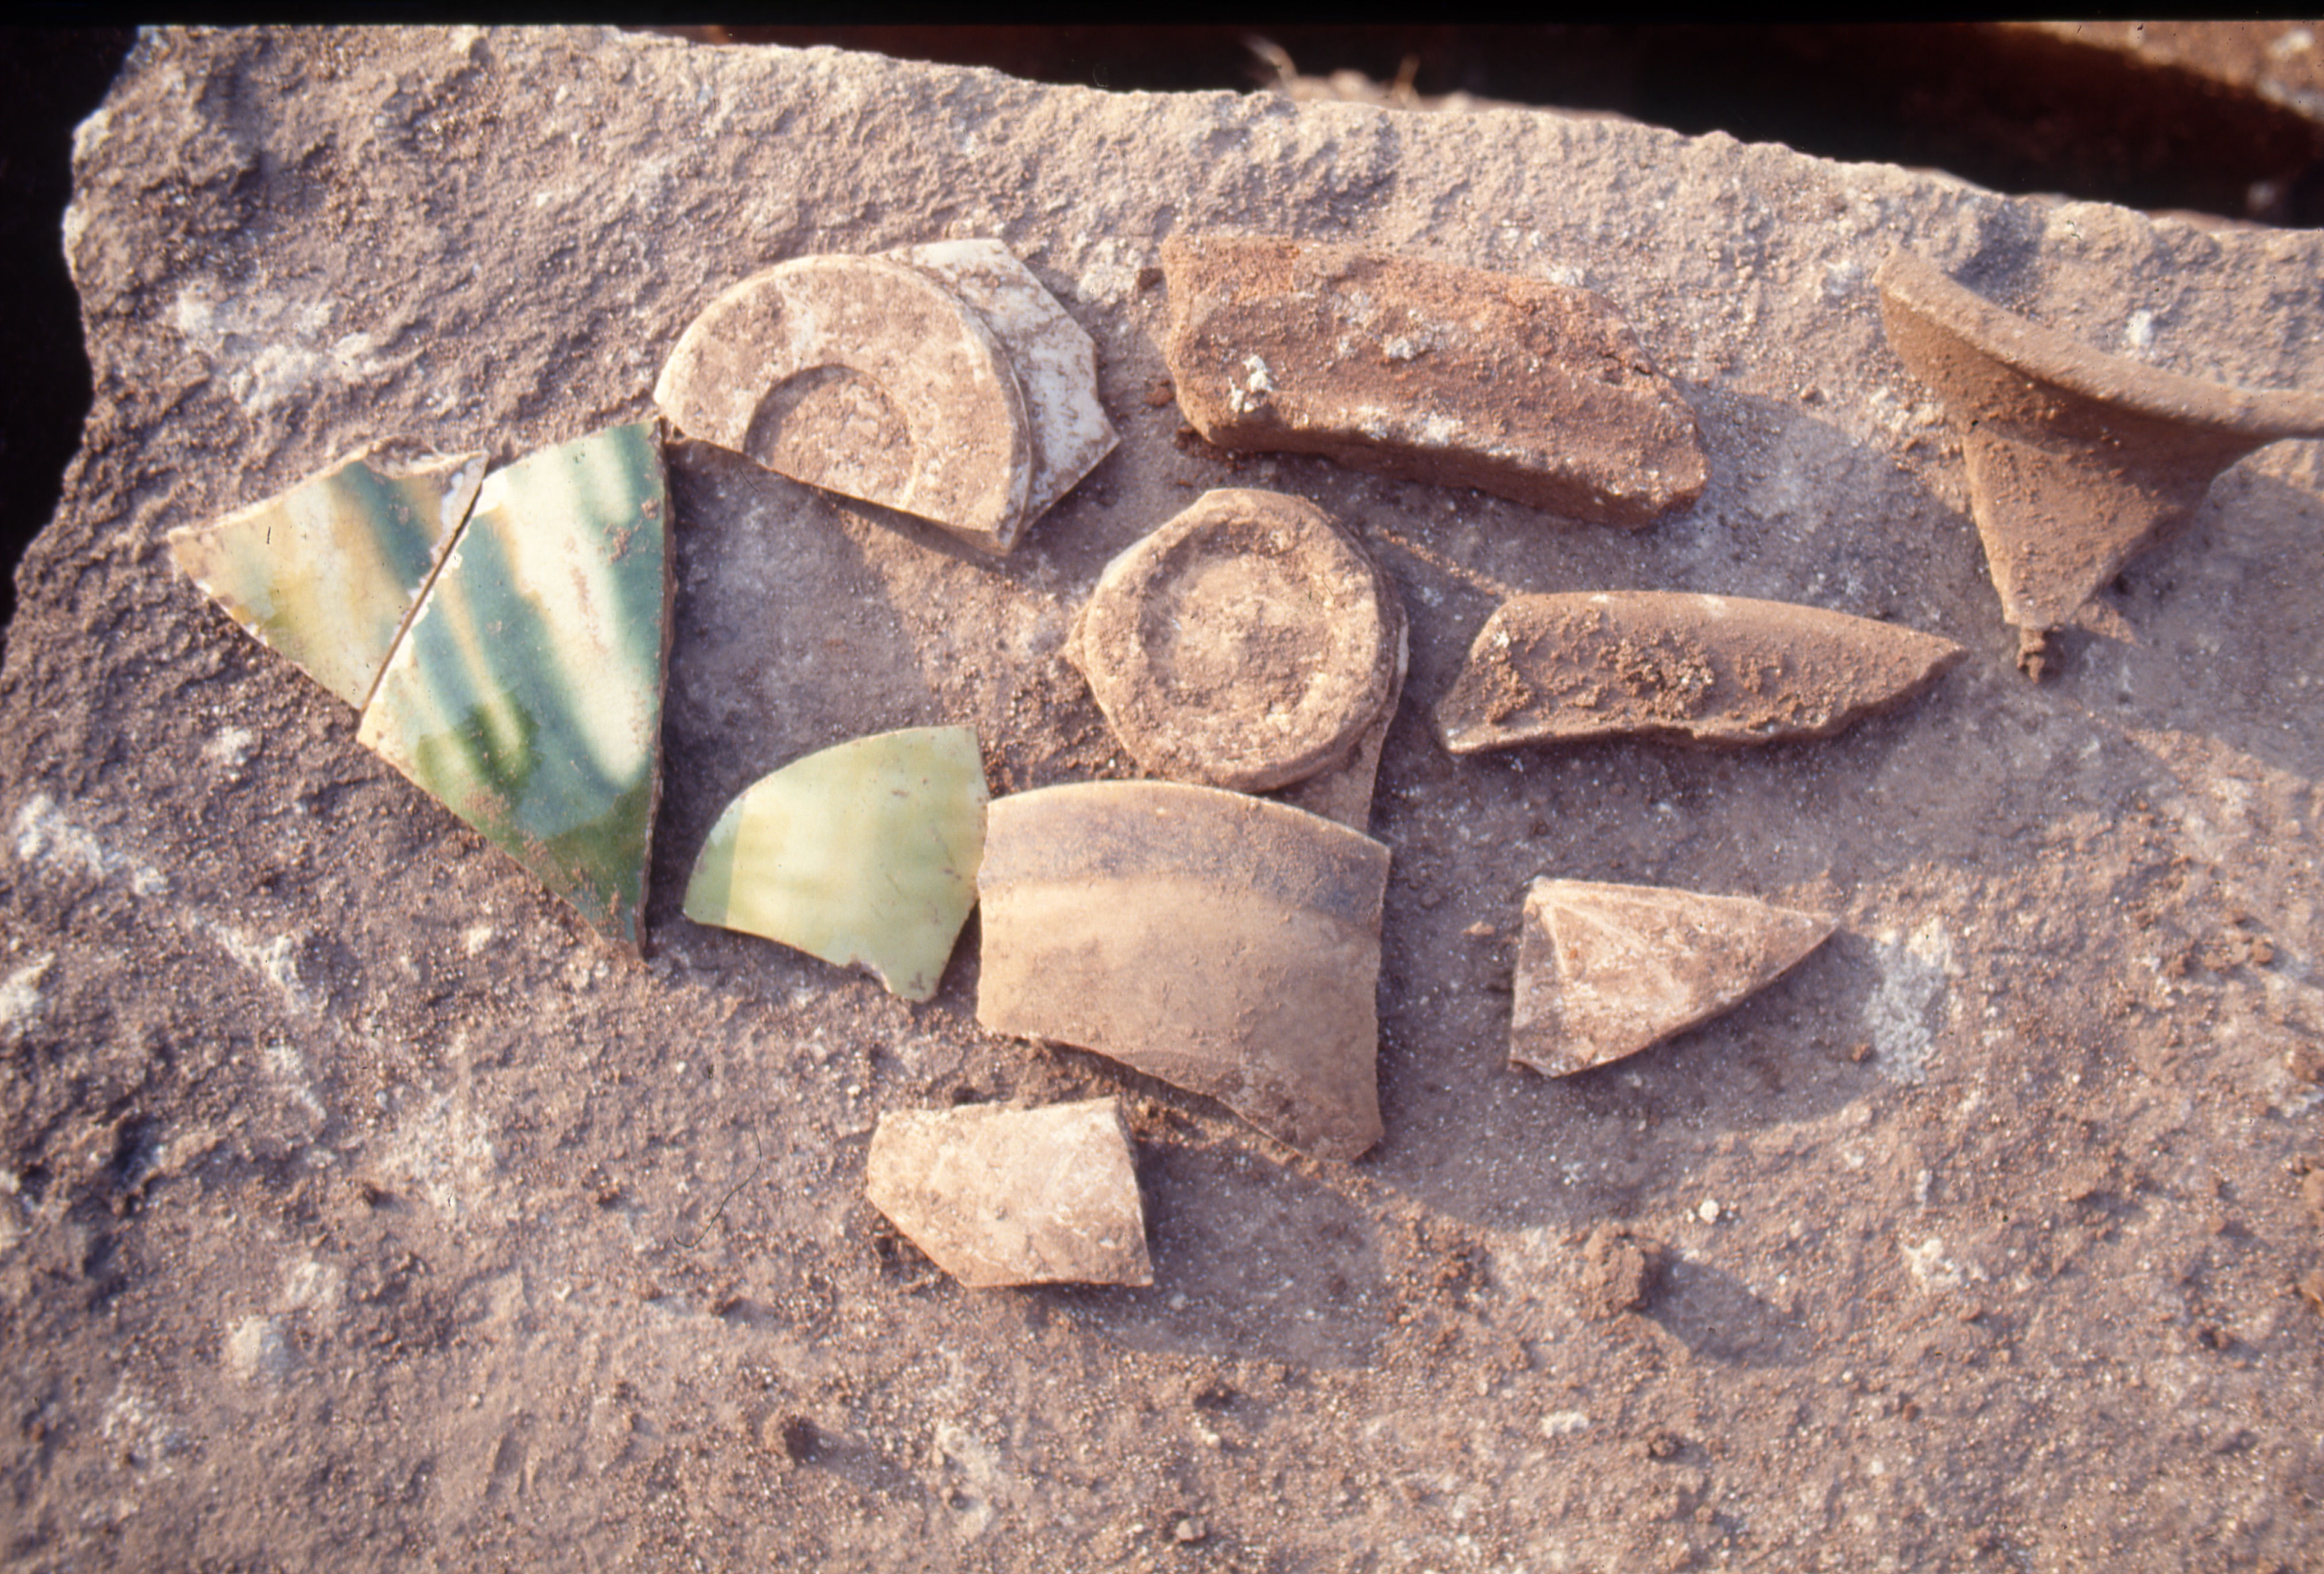 Photo 102: Sherds collected in 1986. Note the <em>bi</em> foot of the white bowl, top left.